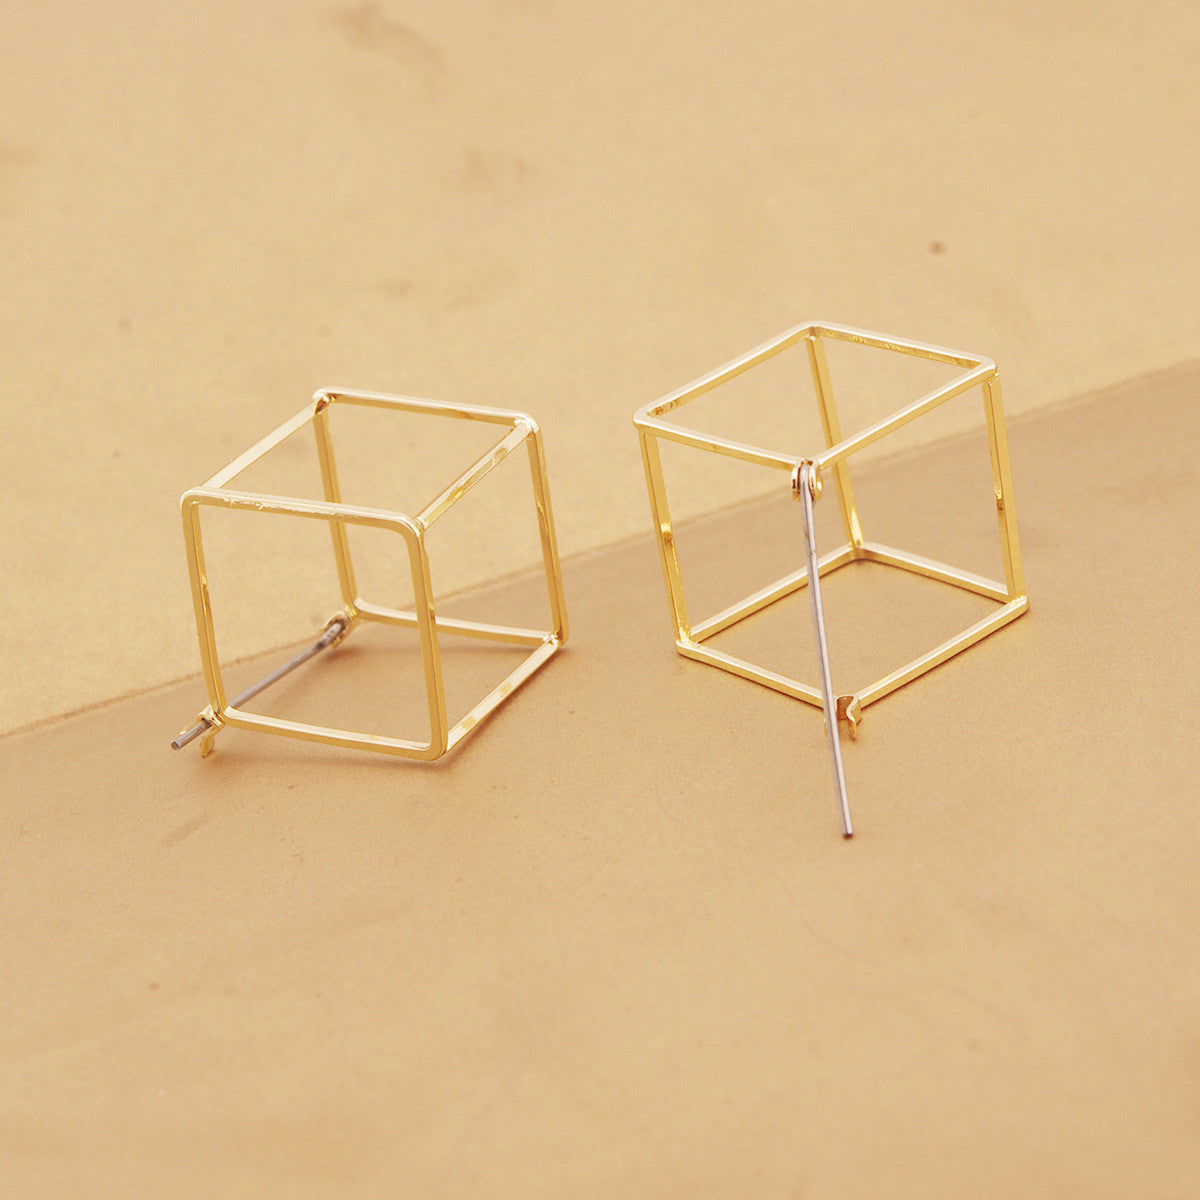 Fashion Cube Lady's Earrings - Oh Yours Fashion - 7